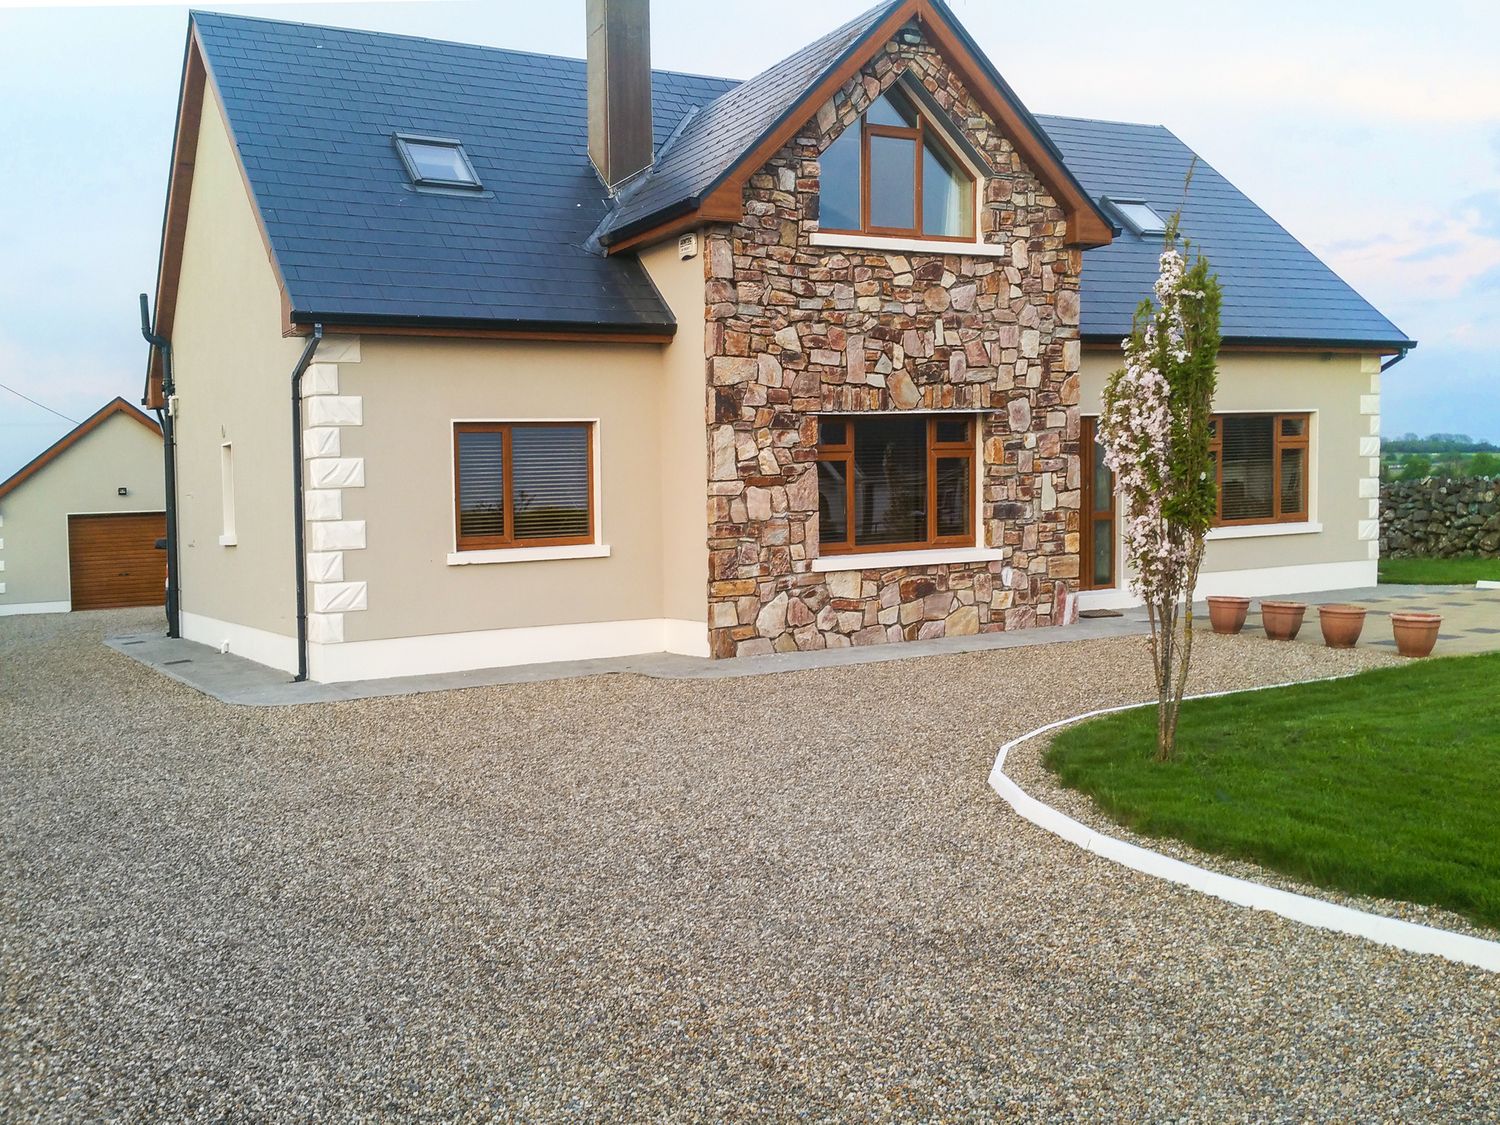 A Country View Cottage - Shancroagh & County Galway - 934705 - photo 1